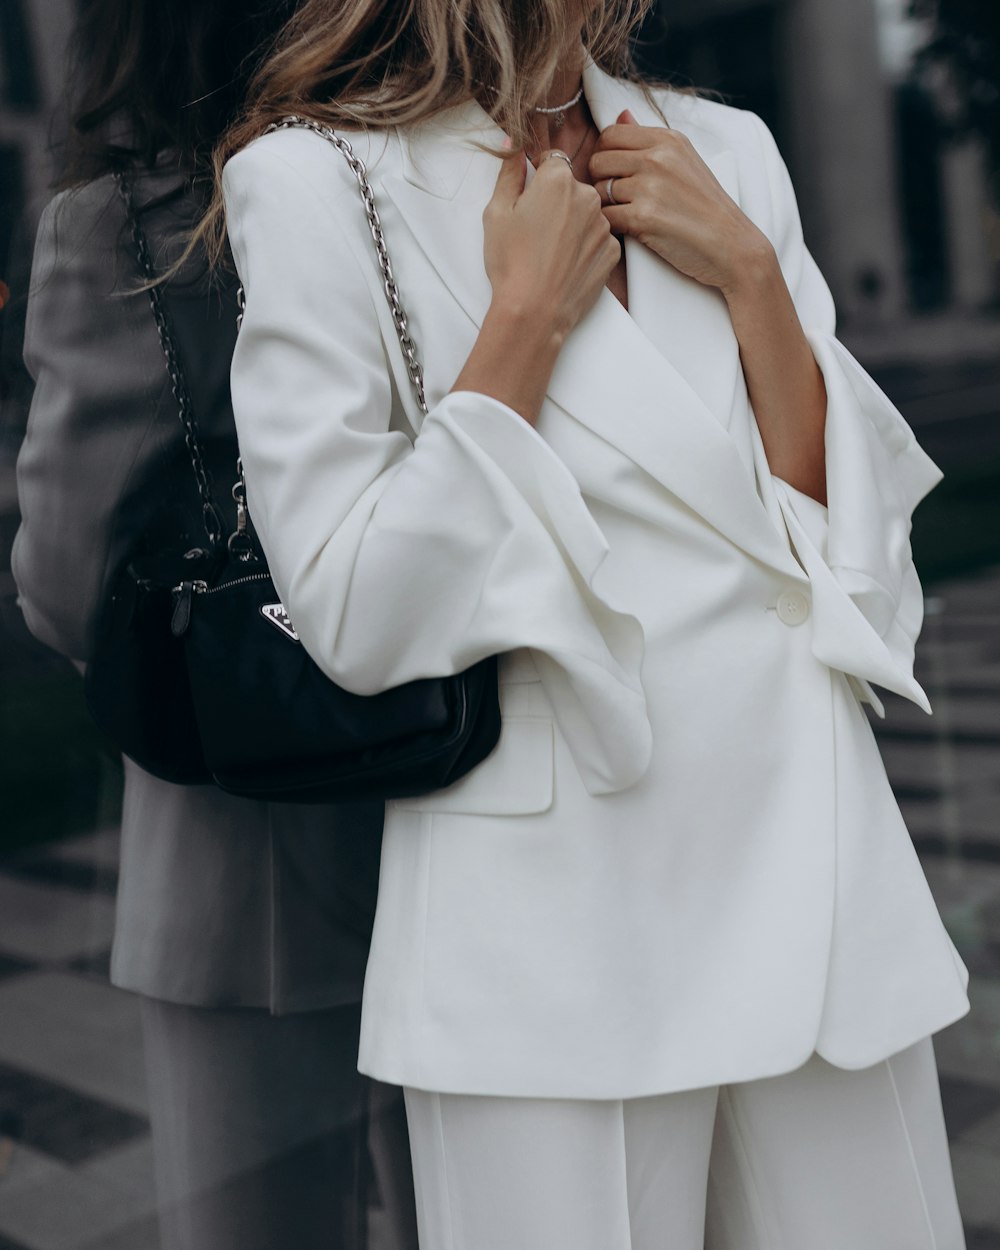 a woman wearing a white suit and holding a black purse